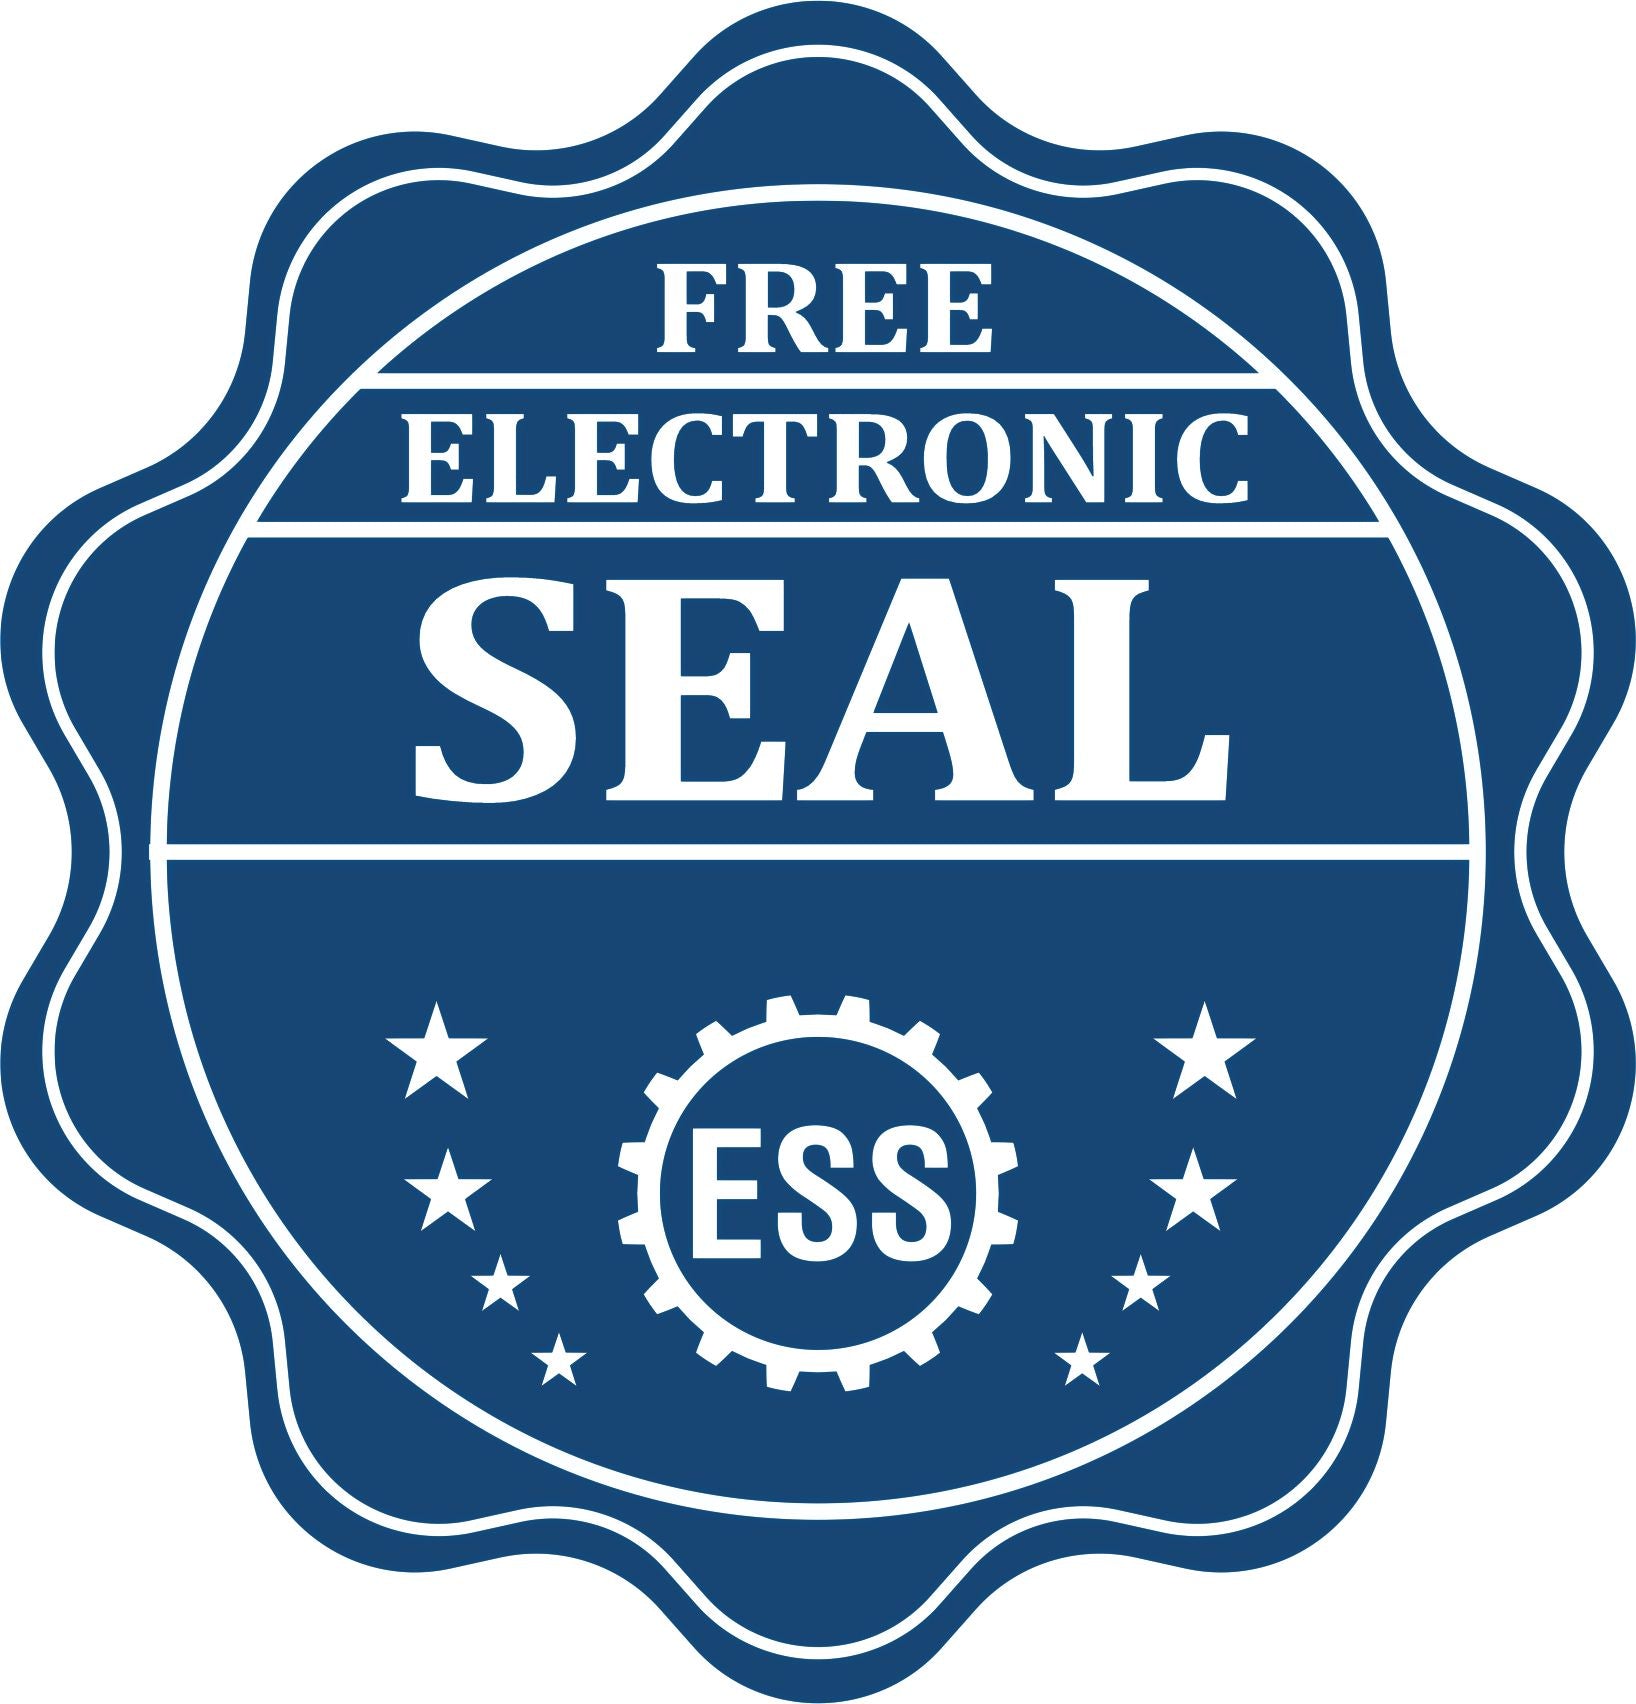 A badge showing a free electronic seal for the South Dakota Geologist Desk Seal with stars and the ESS gear on the emblem.